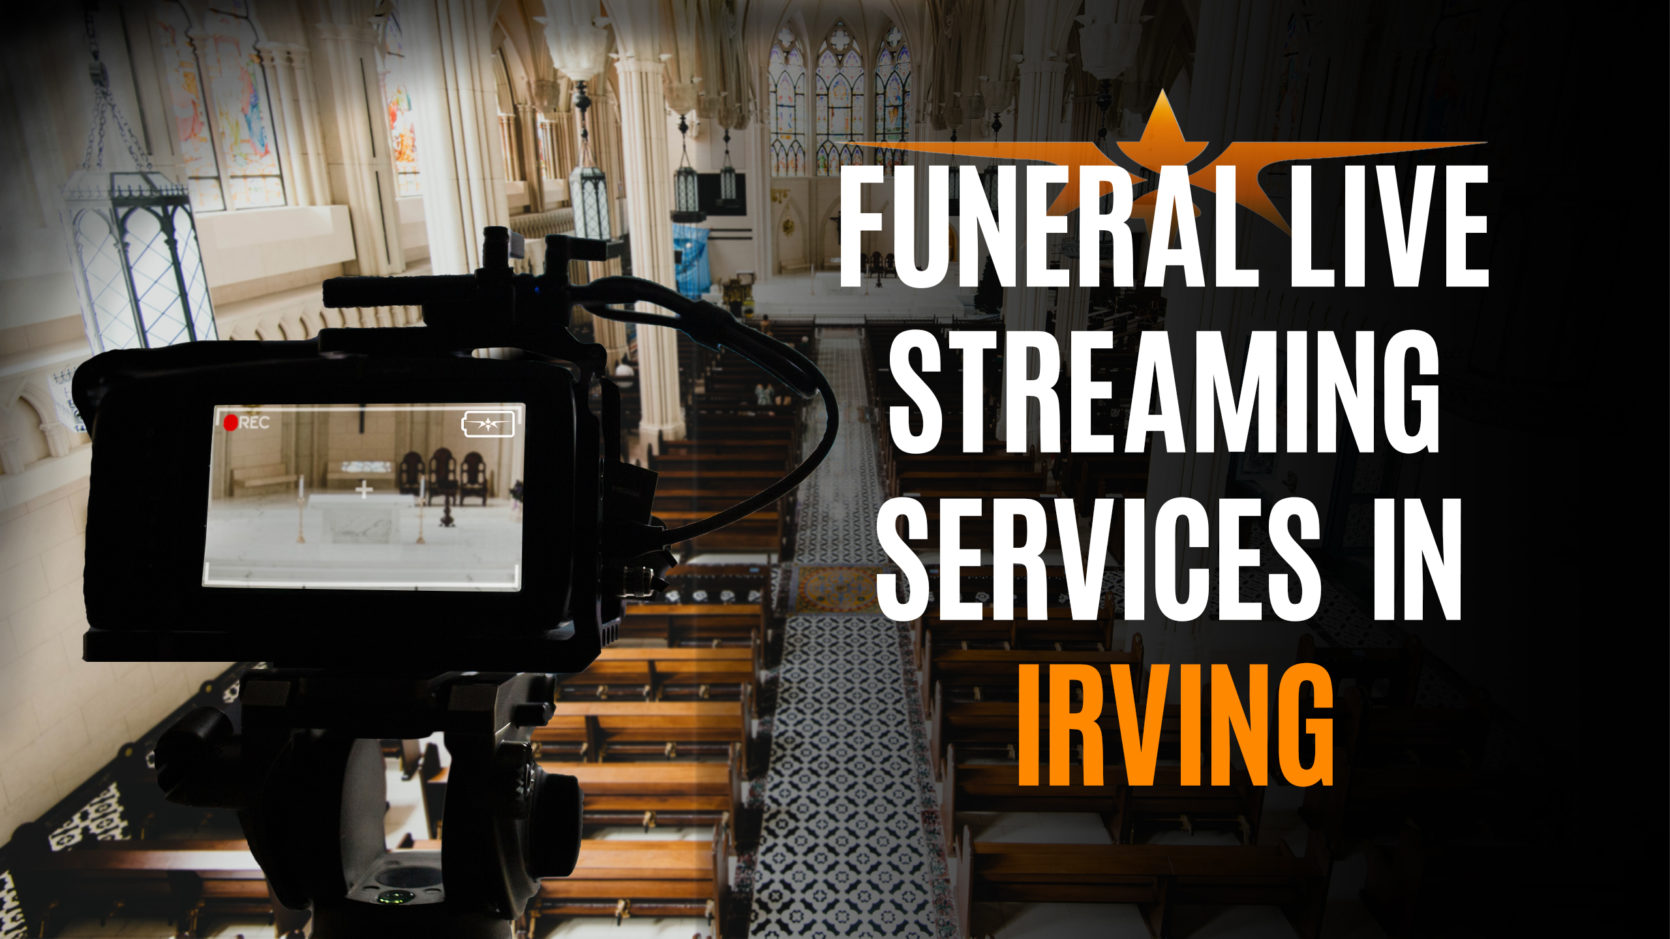 Funeral Live Streaming Services in Irving